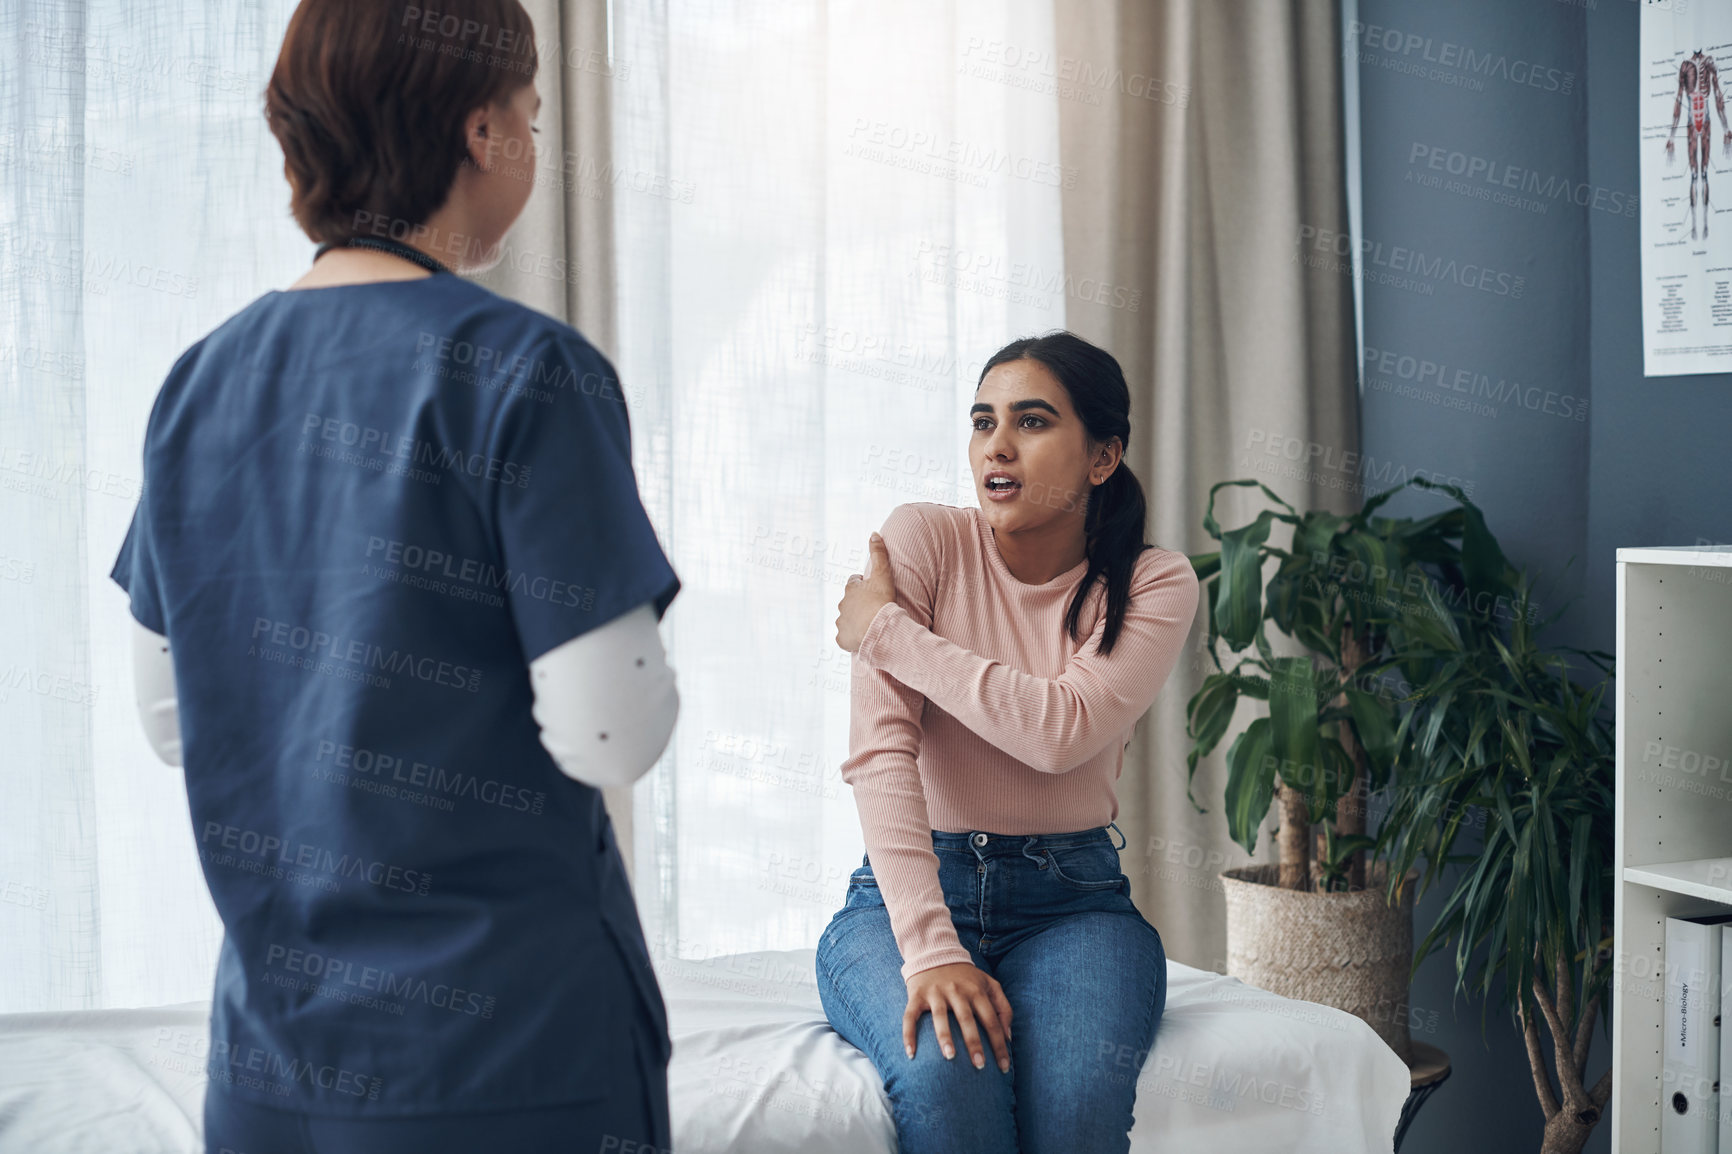 Buy stock photo Shot of a young female patient talking to a doctor in an office